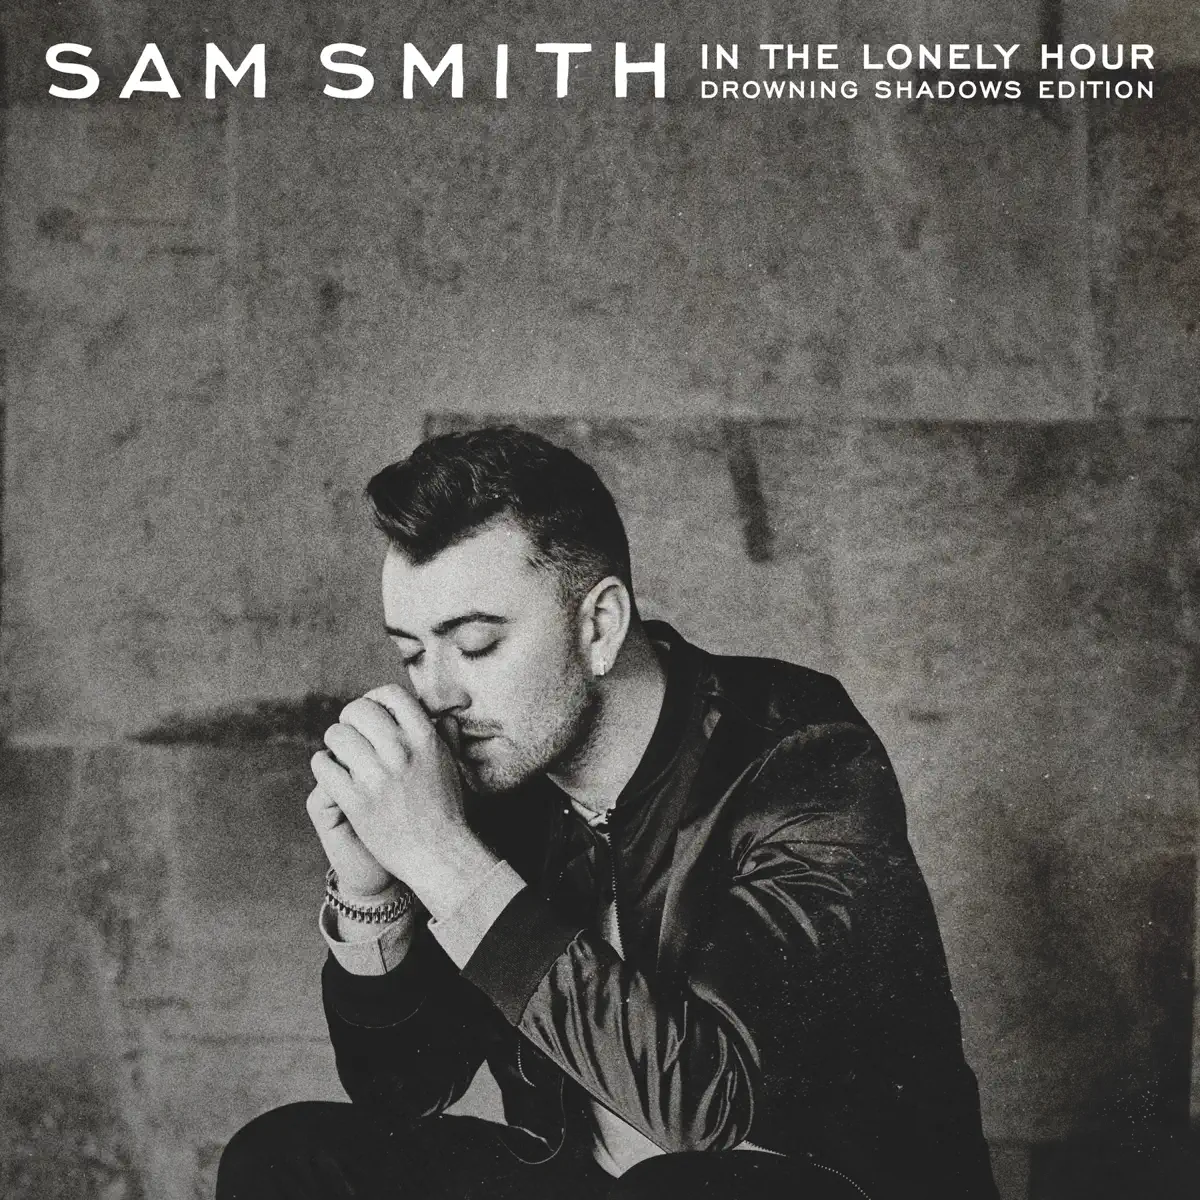 Sam Smith - In The Lonely Hour (Drowning Shadows Edition) [Apple Digital Master] (2015) [iTunes Plus AAC M4A + M4V – Full HD]-新房子